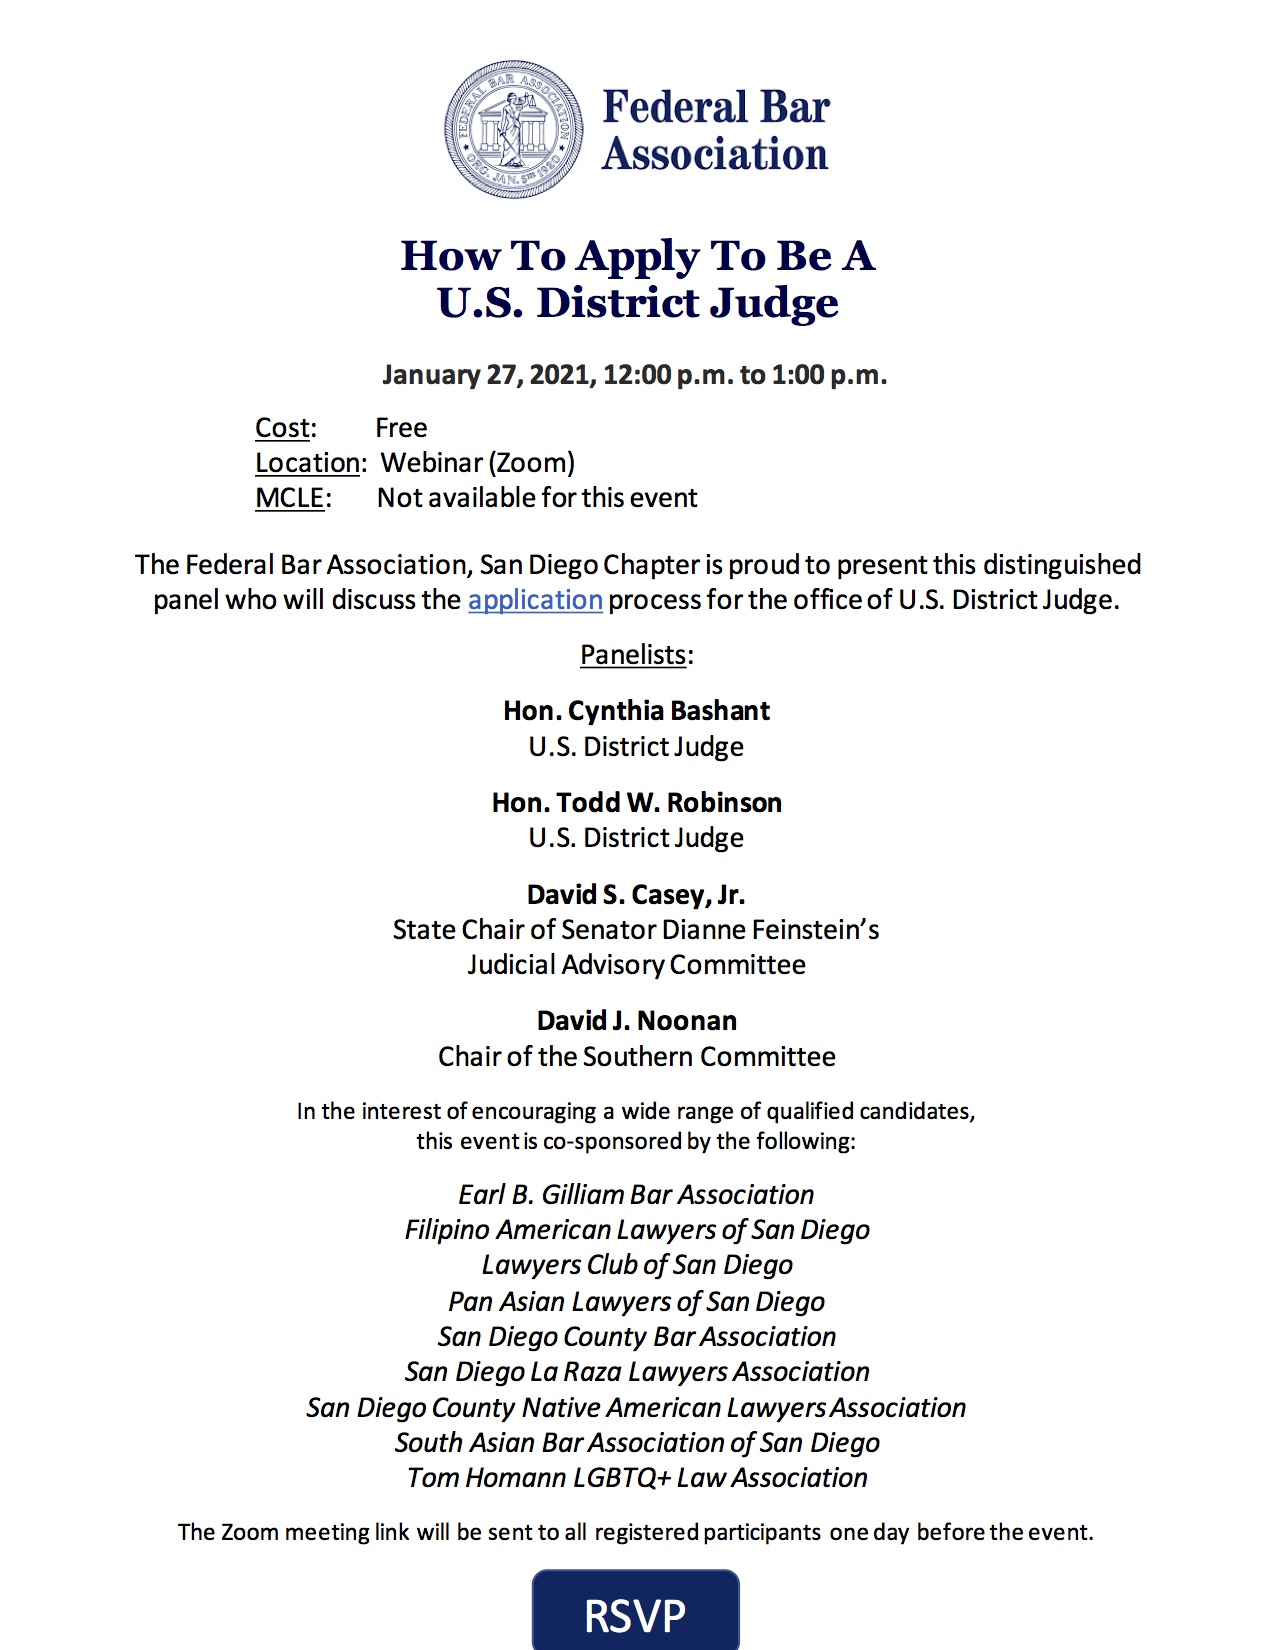 flyer how to apply to be a u.s. district court judge